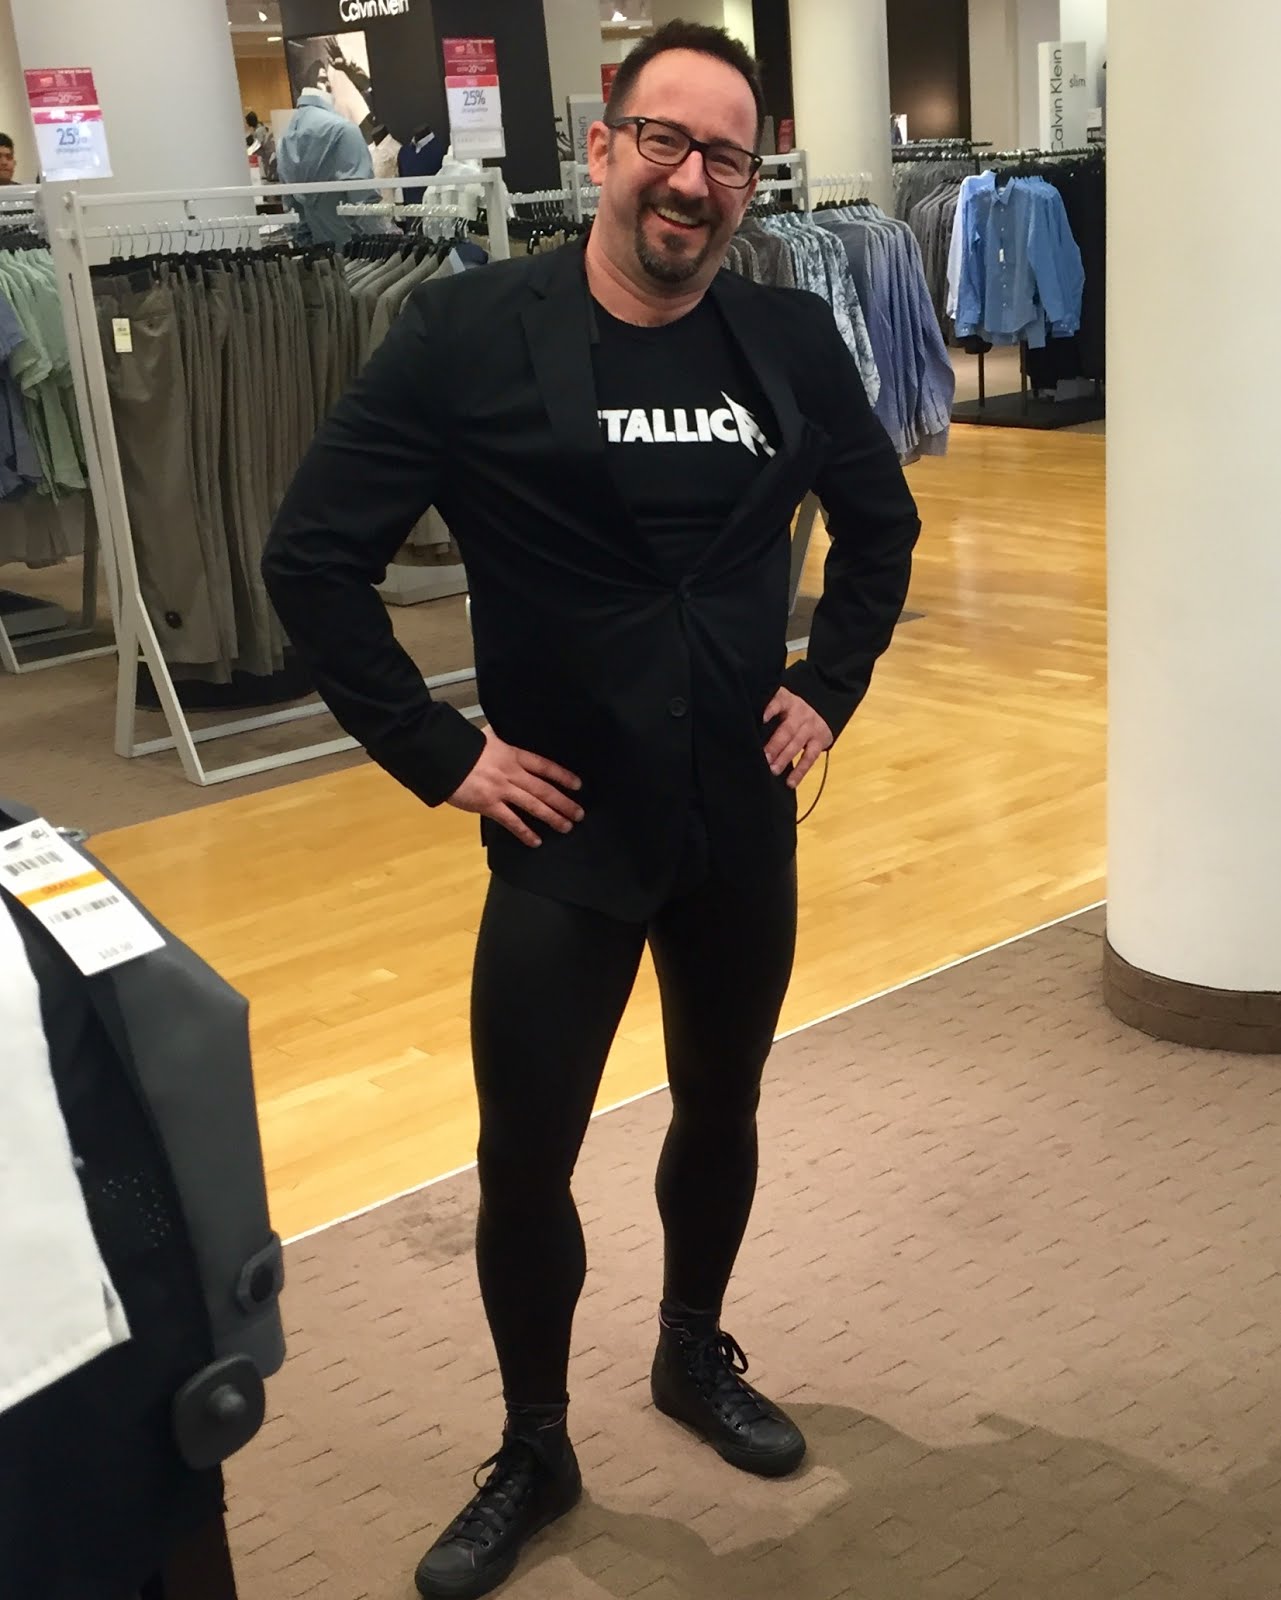 Hosiery For Men: 10 Steps for Men to Wear Tights as Fashion - Conquering  Your Demons